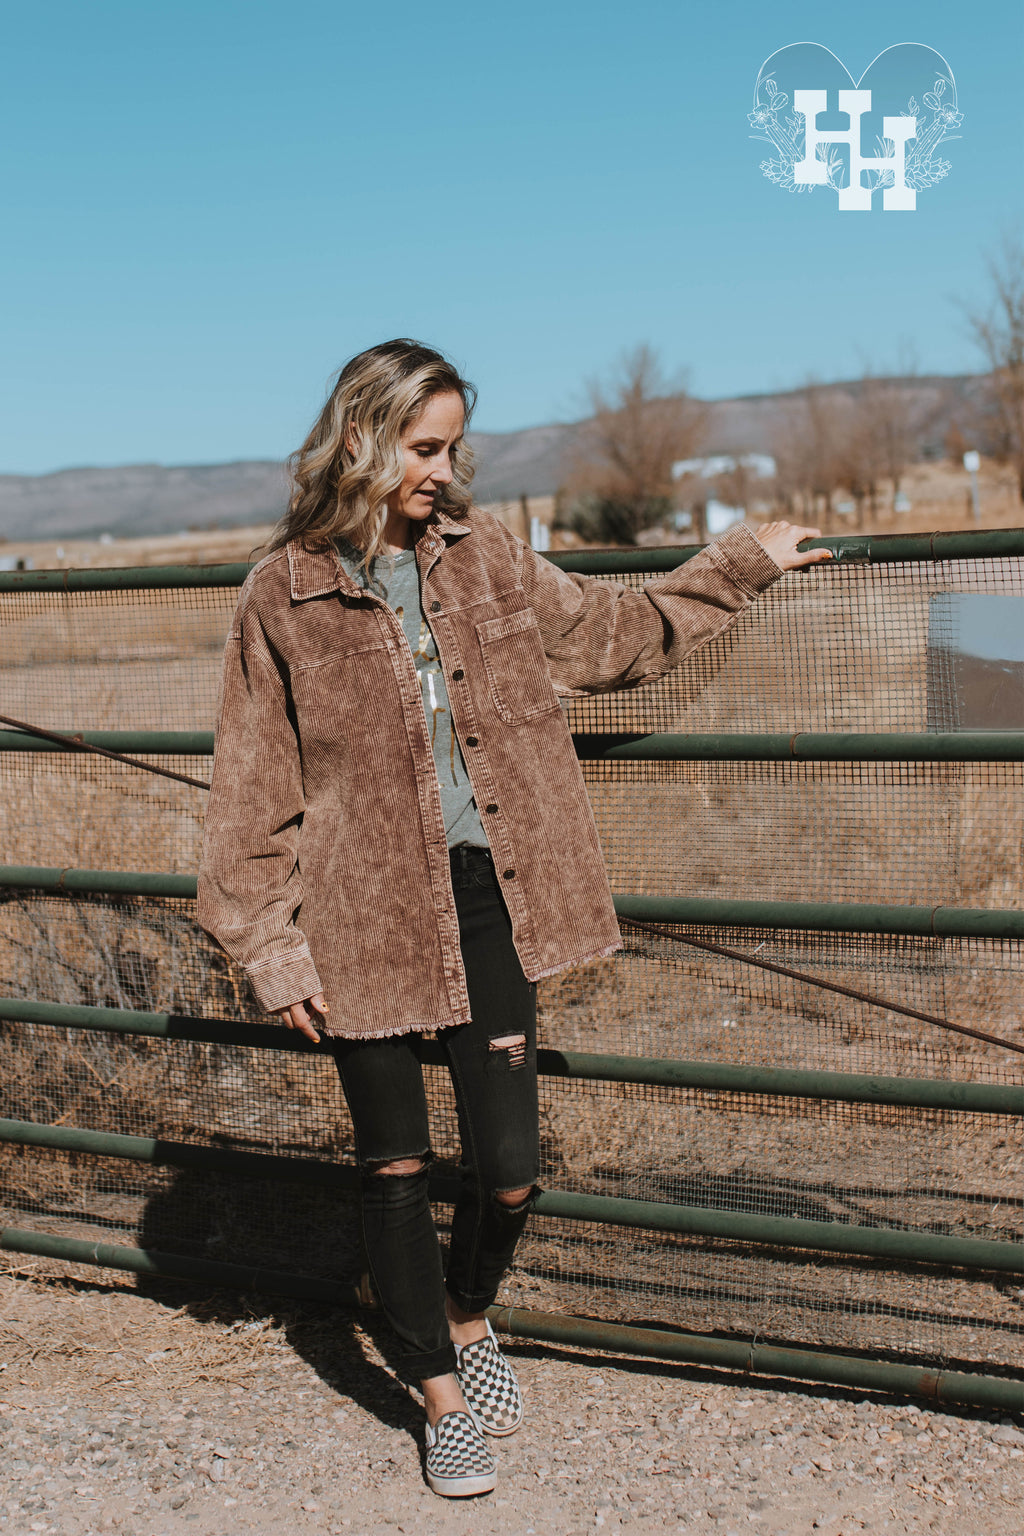 Girl standing by a gate wearing a coffee brown corduroy jacket. The jacket is oversized with an unfinished bottom hem, button up with one best pocket on the left side. The brown color has a light acid wash look to it.